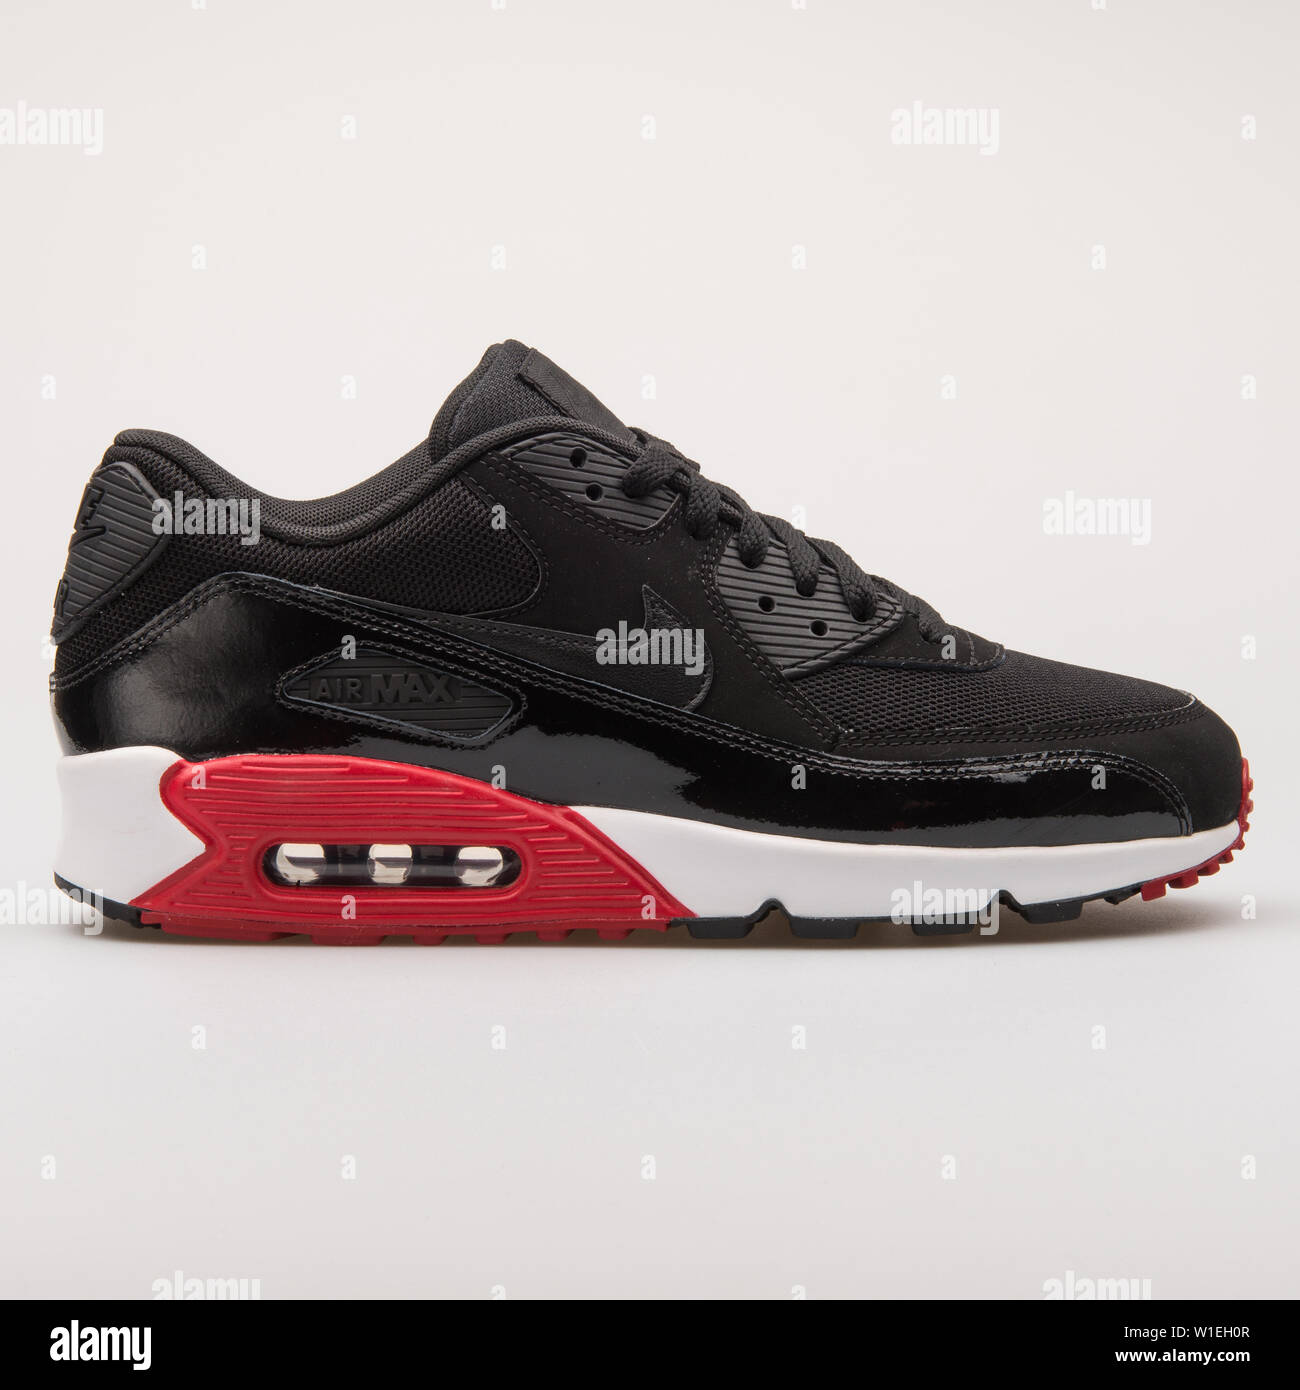 VIENNA, AUSTRIA - AUGUST 23, 2017: Nike Air Max 90 Essential black and red  sneaker on white background Stock Photo - Alamy